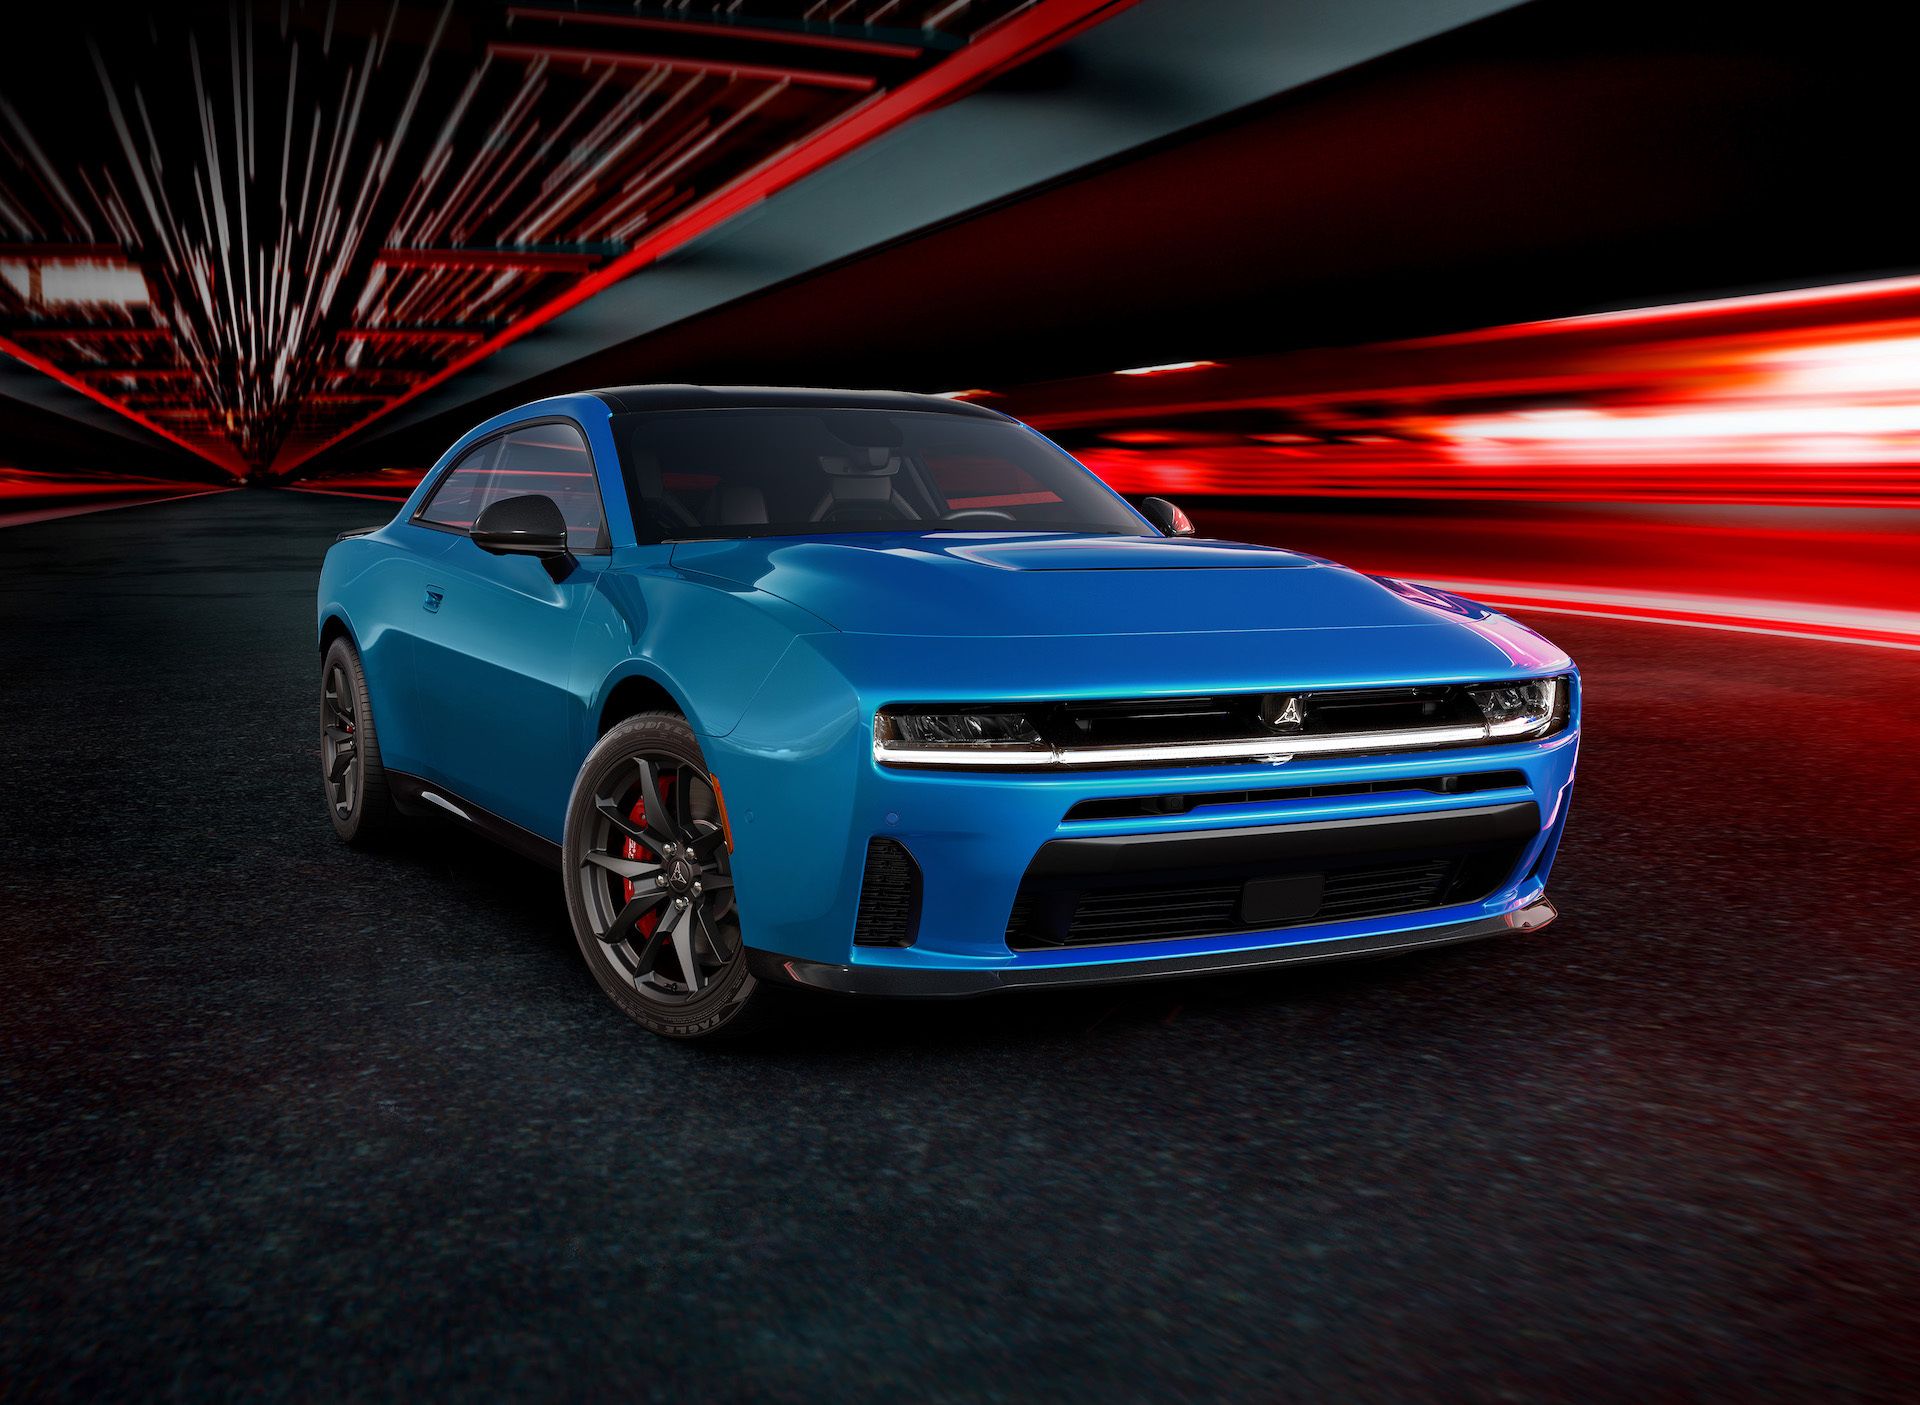 Dodge Gears Up to Unveil the Next-Generation Charger with Three Exclusive Teasers